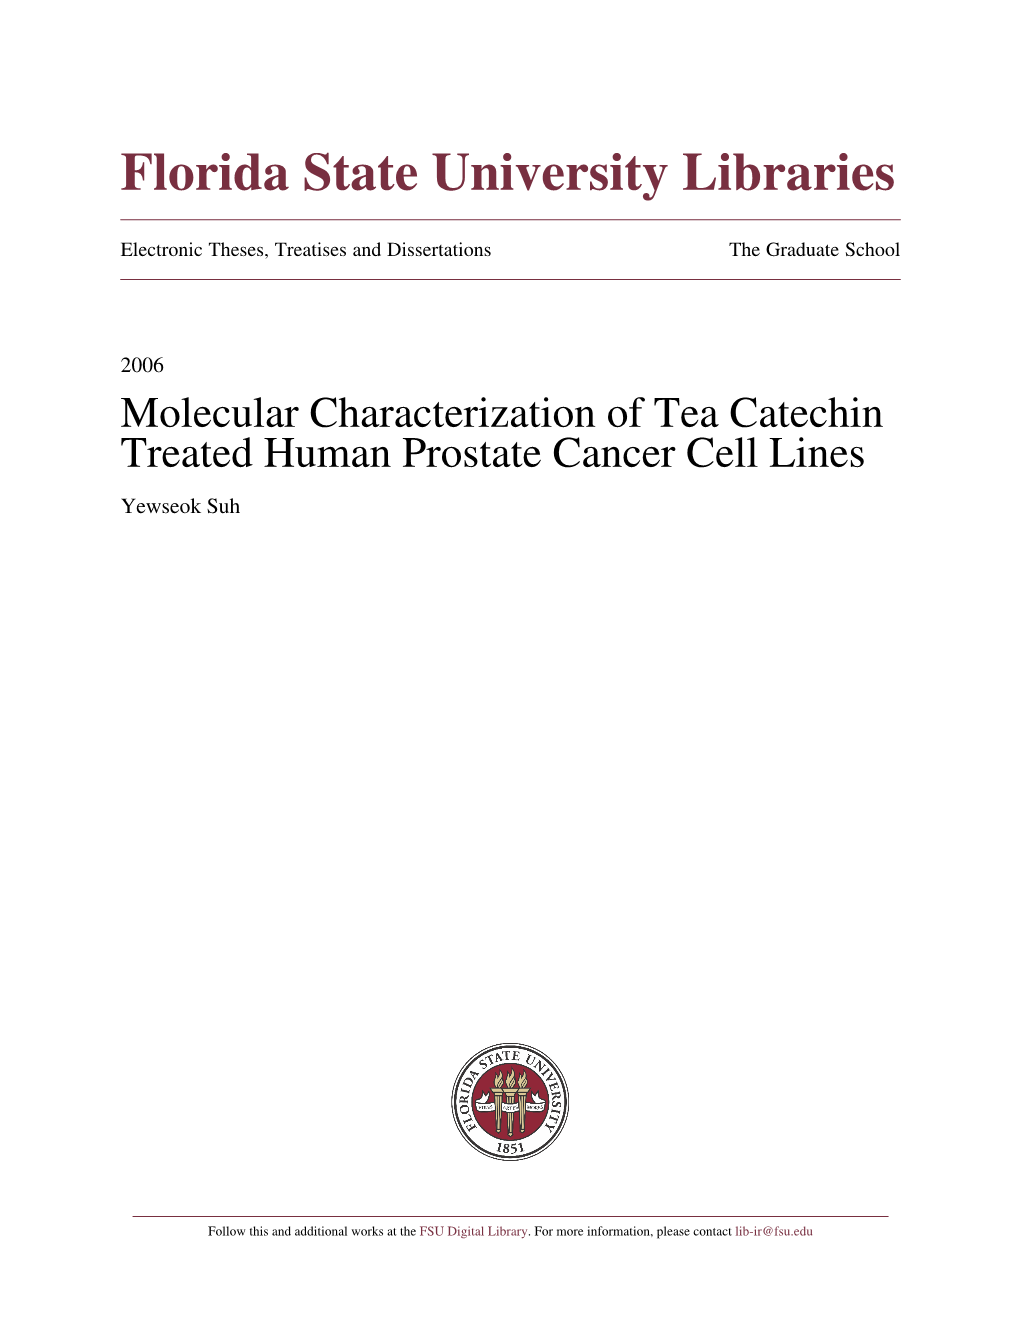 Molecular Characterization of Tea Catechin Treated Human Prostate Cancer Cell Lines Yewseok Suh